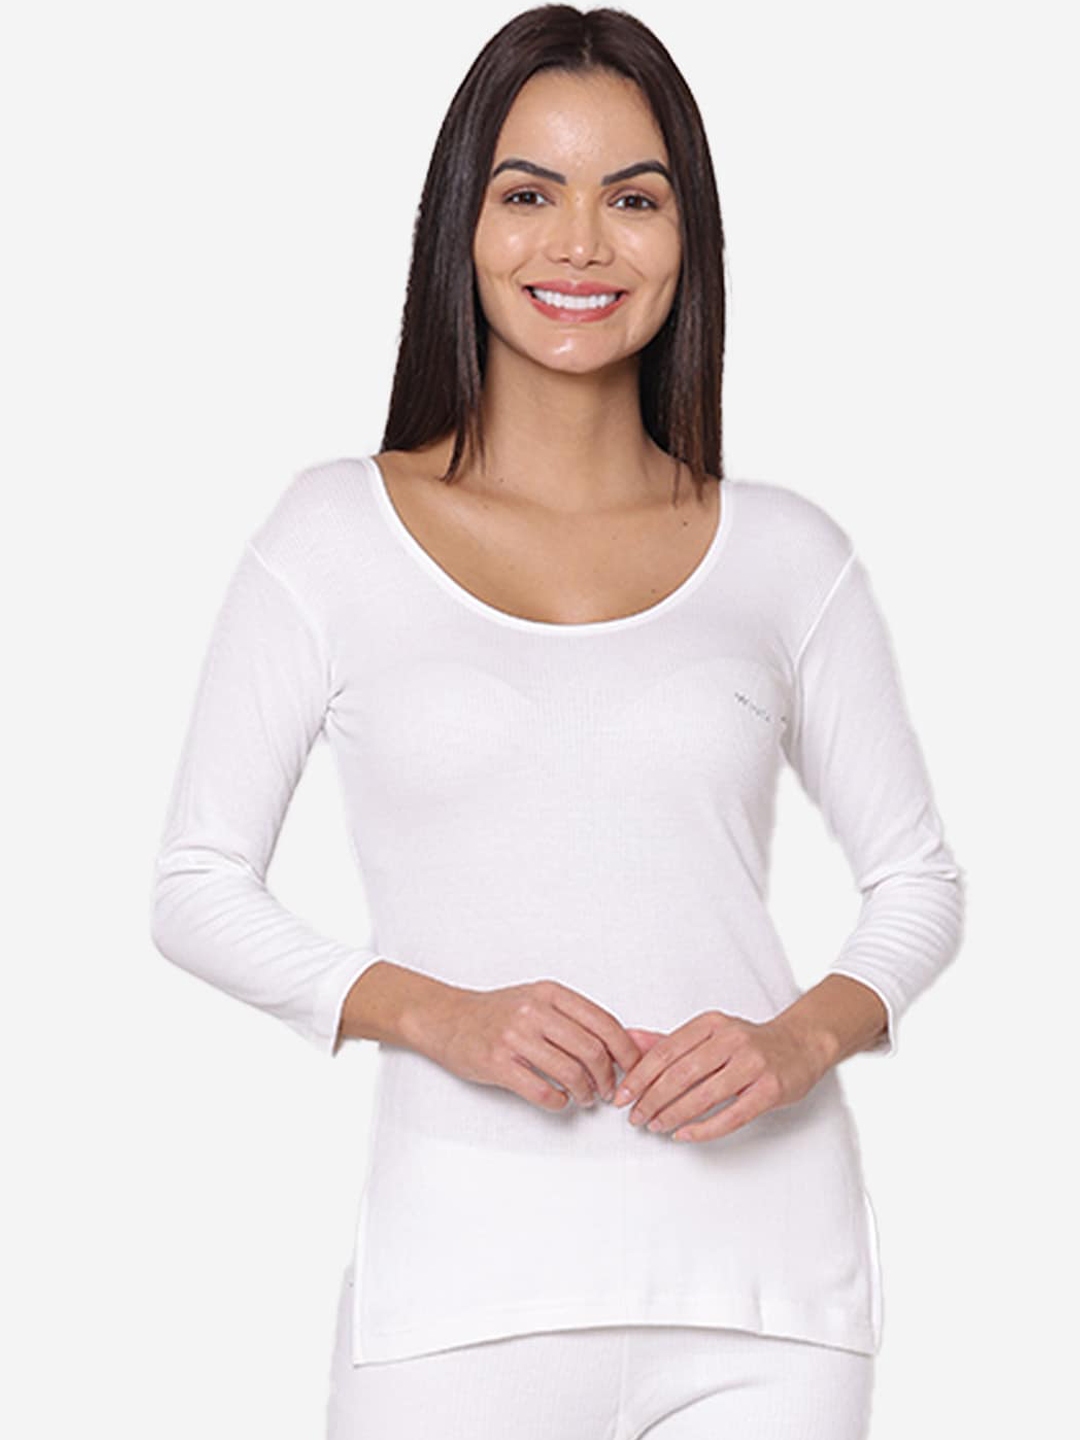 Buy Groversons Paris Beauty Women Thermal Top & Bottom Set White at